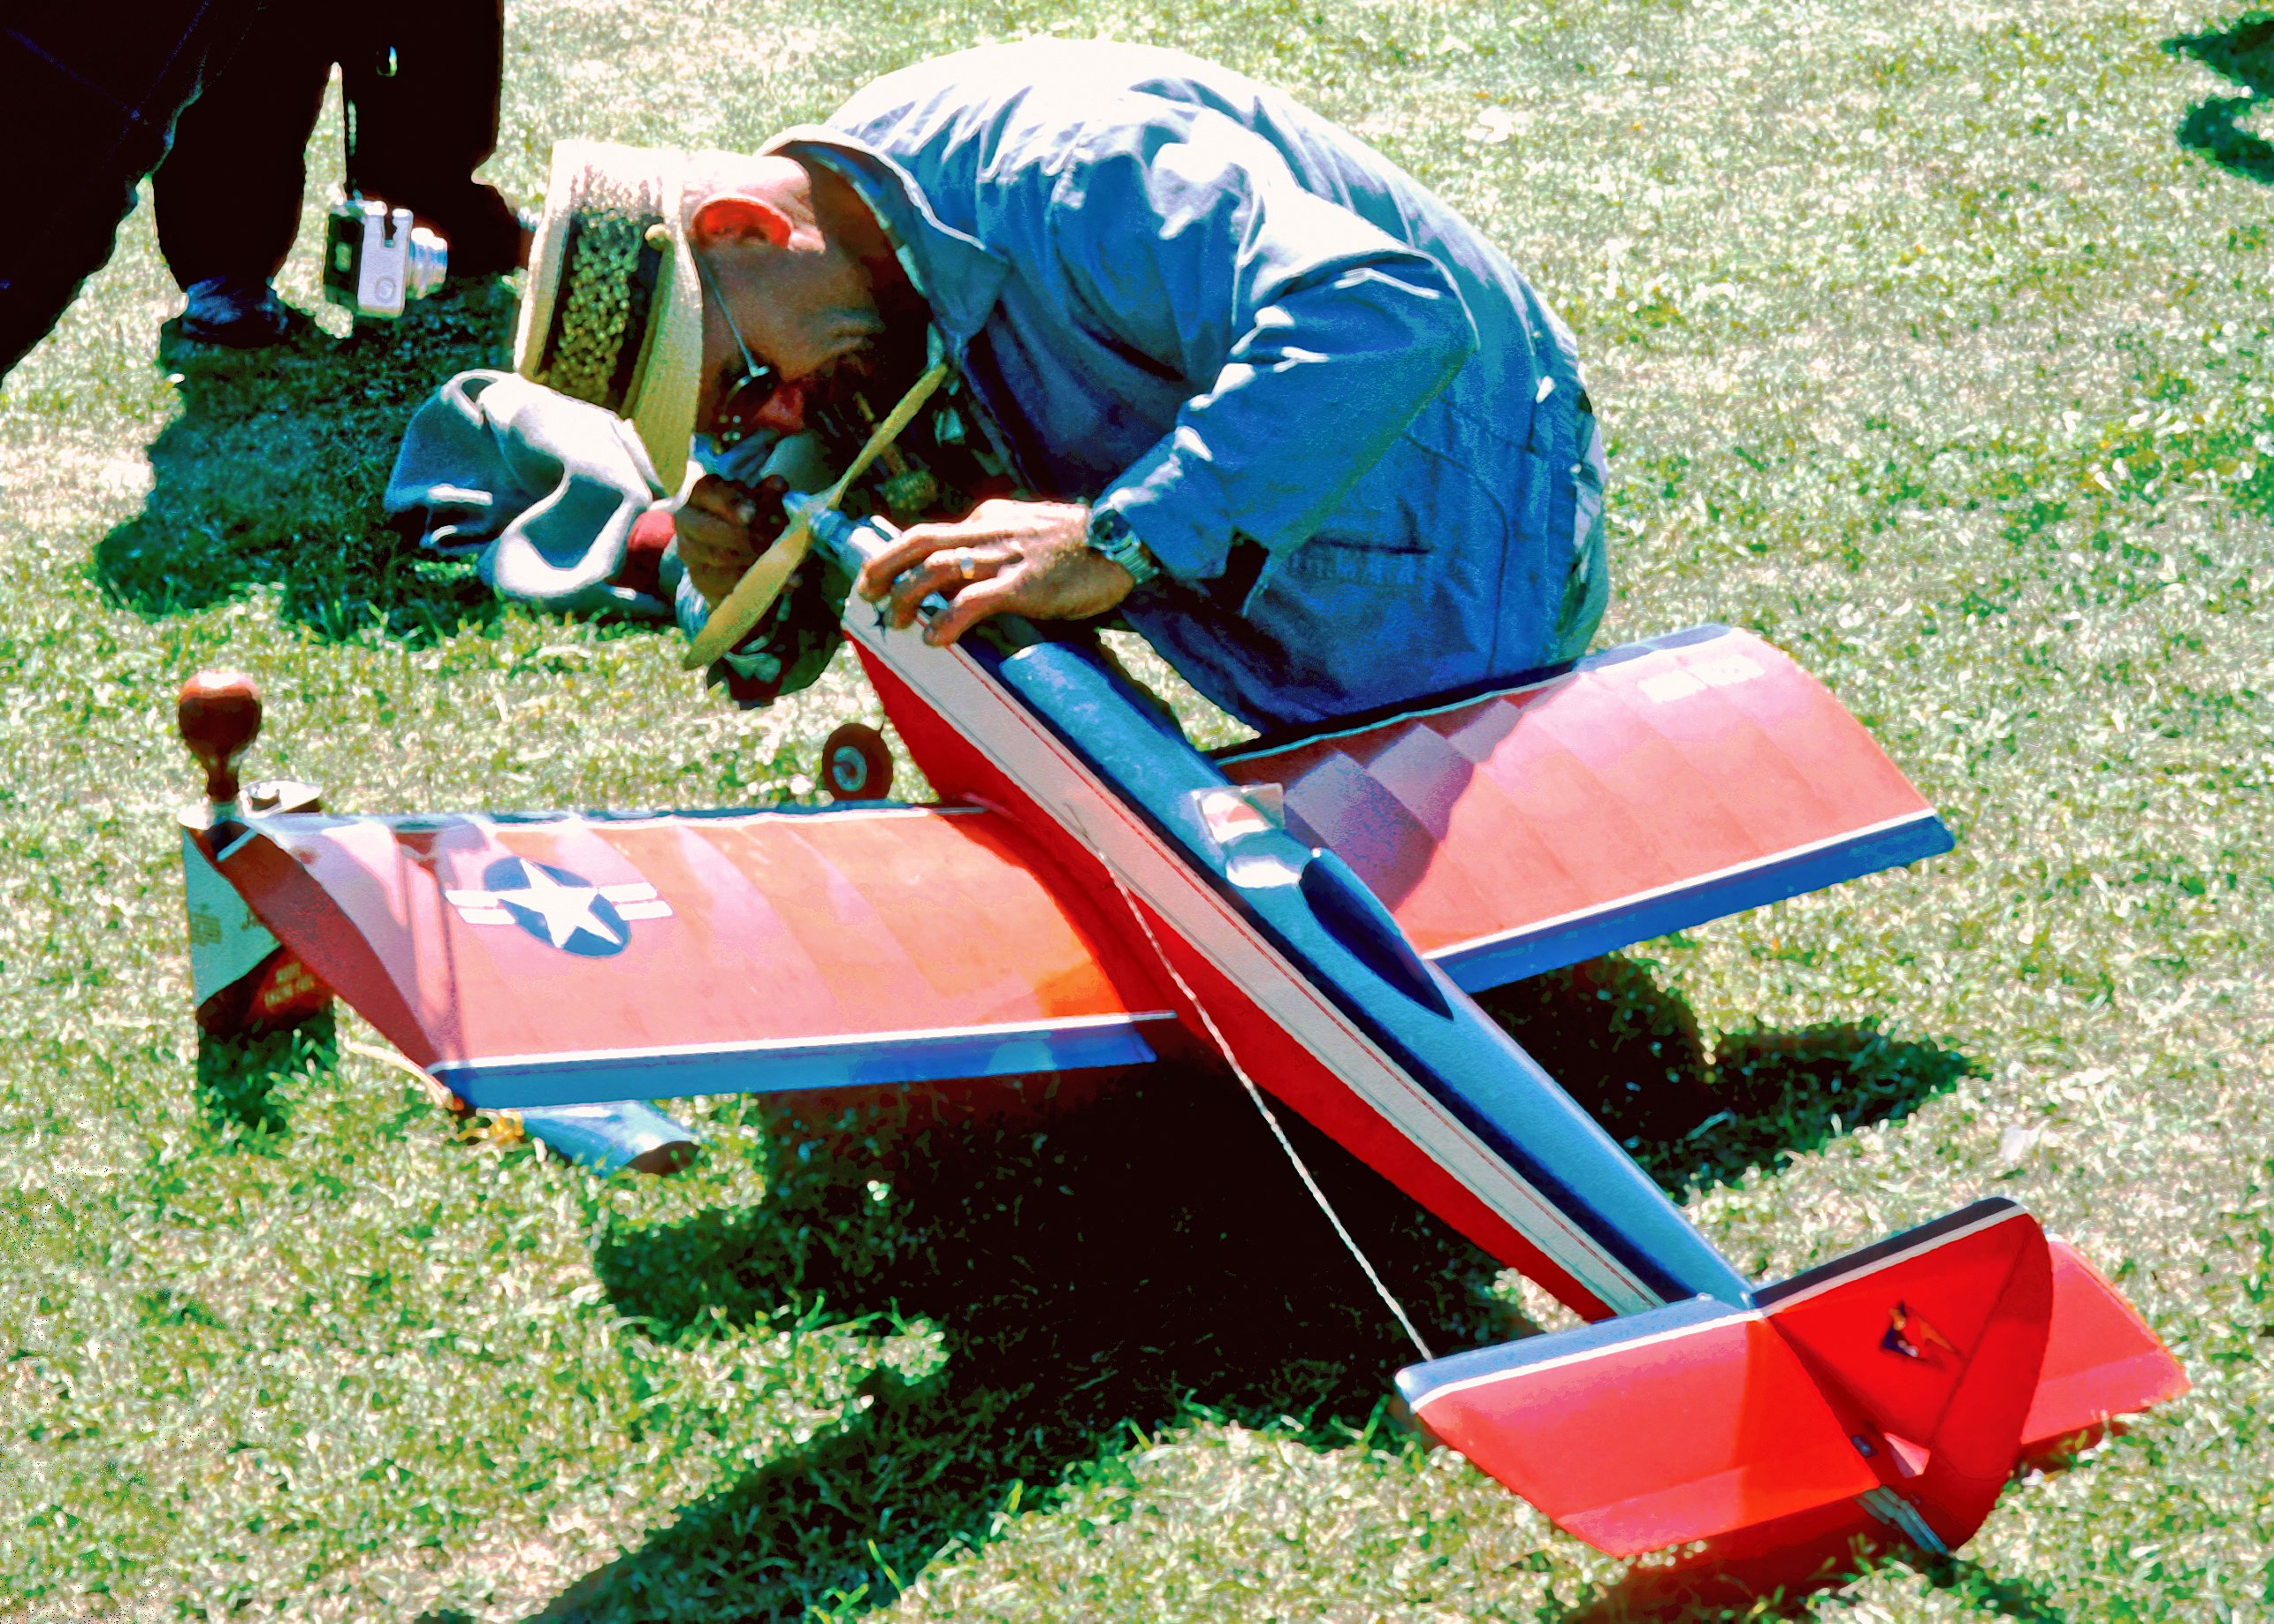 Hal “Pappy” deBolt tinkers with his original-design P-Shooter at a contest in the 1960s.